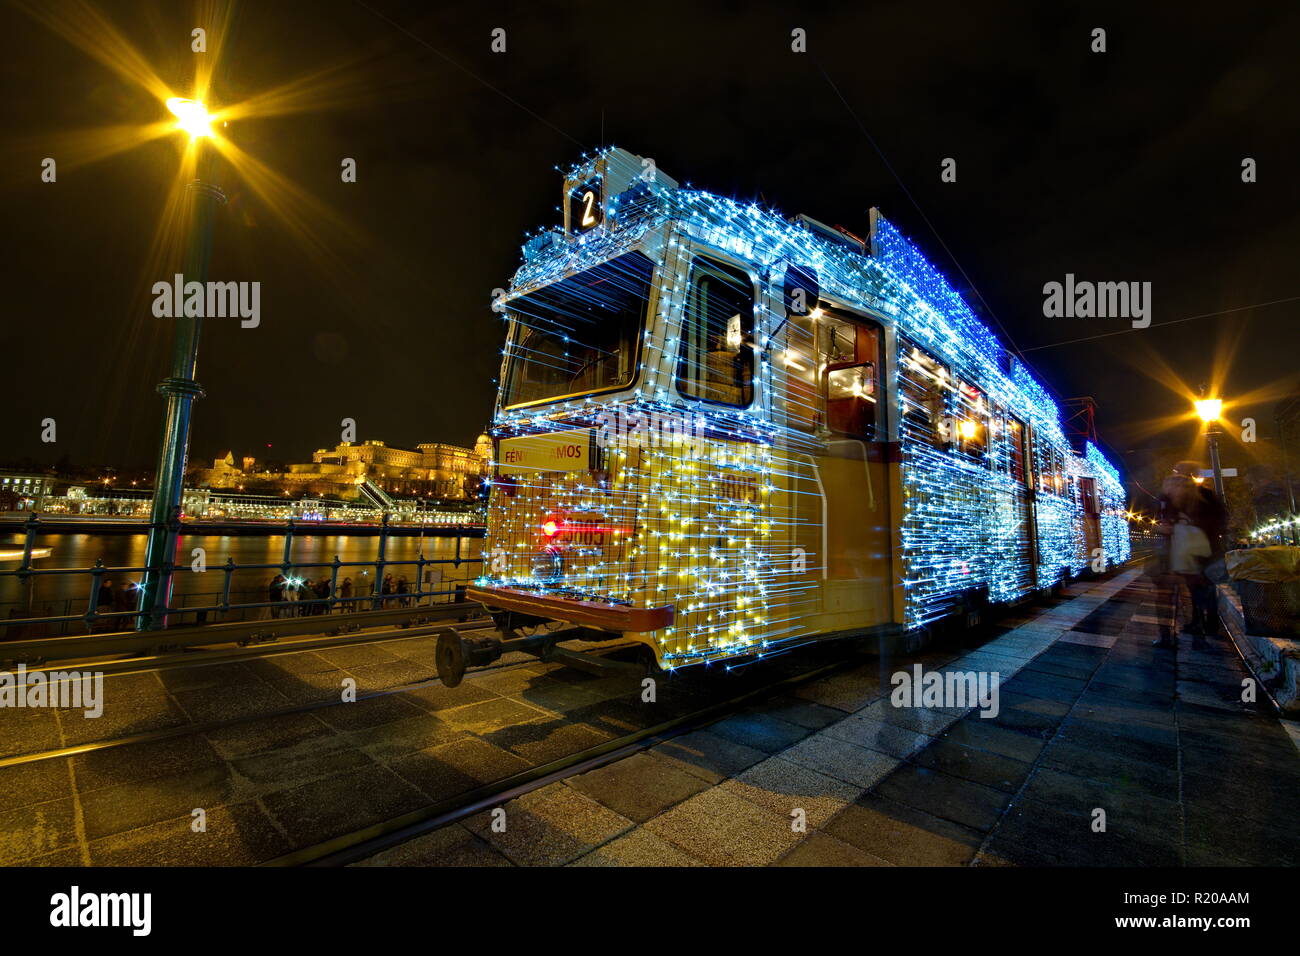 BUDAPEST, HUNGARY - DECEMBER 10, 2015: Christmass lights on a tram in Budapest Stock Photo